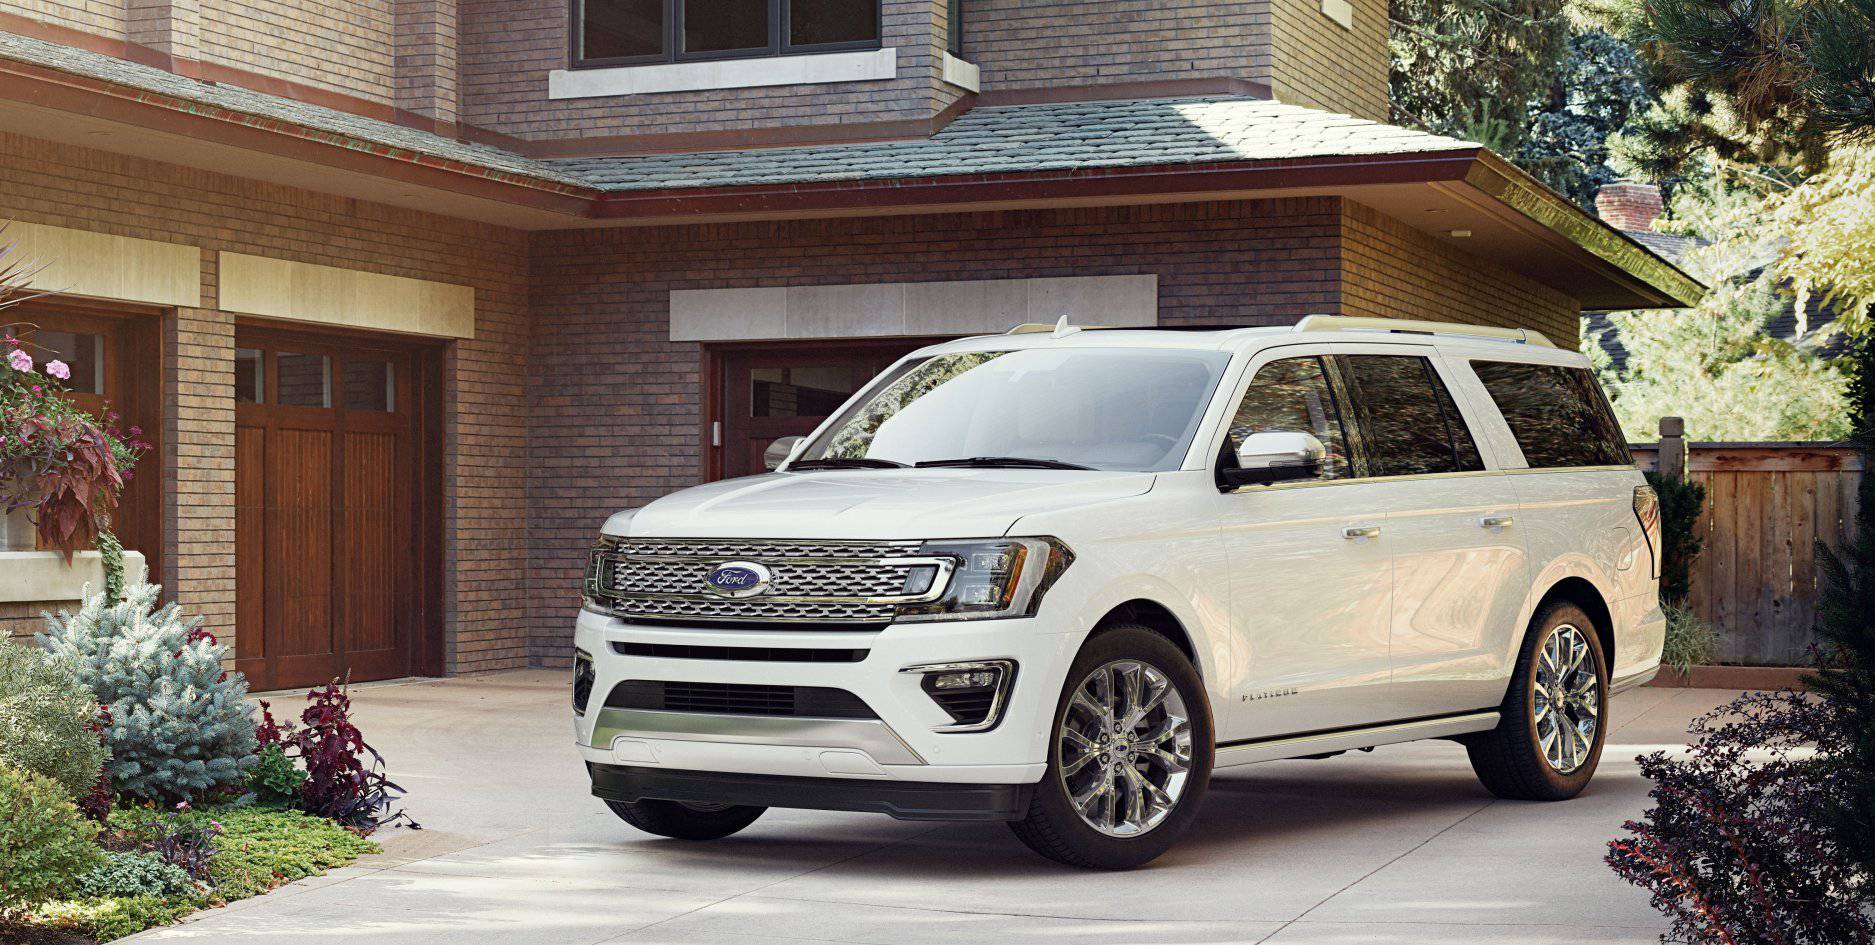 2018 Ford Expedition design